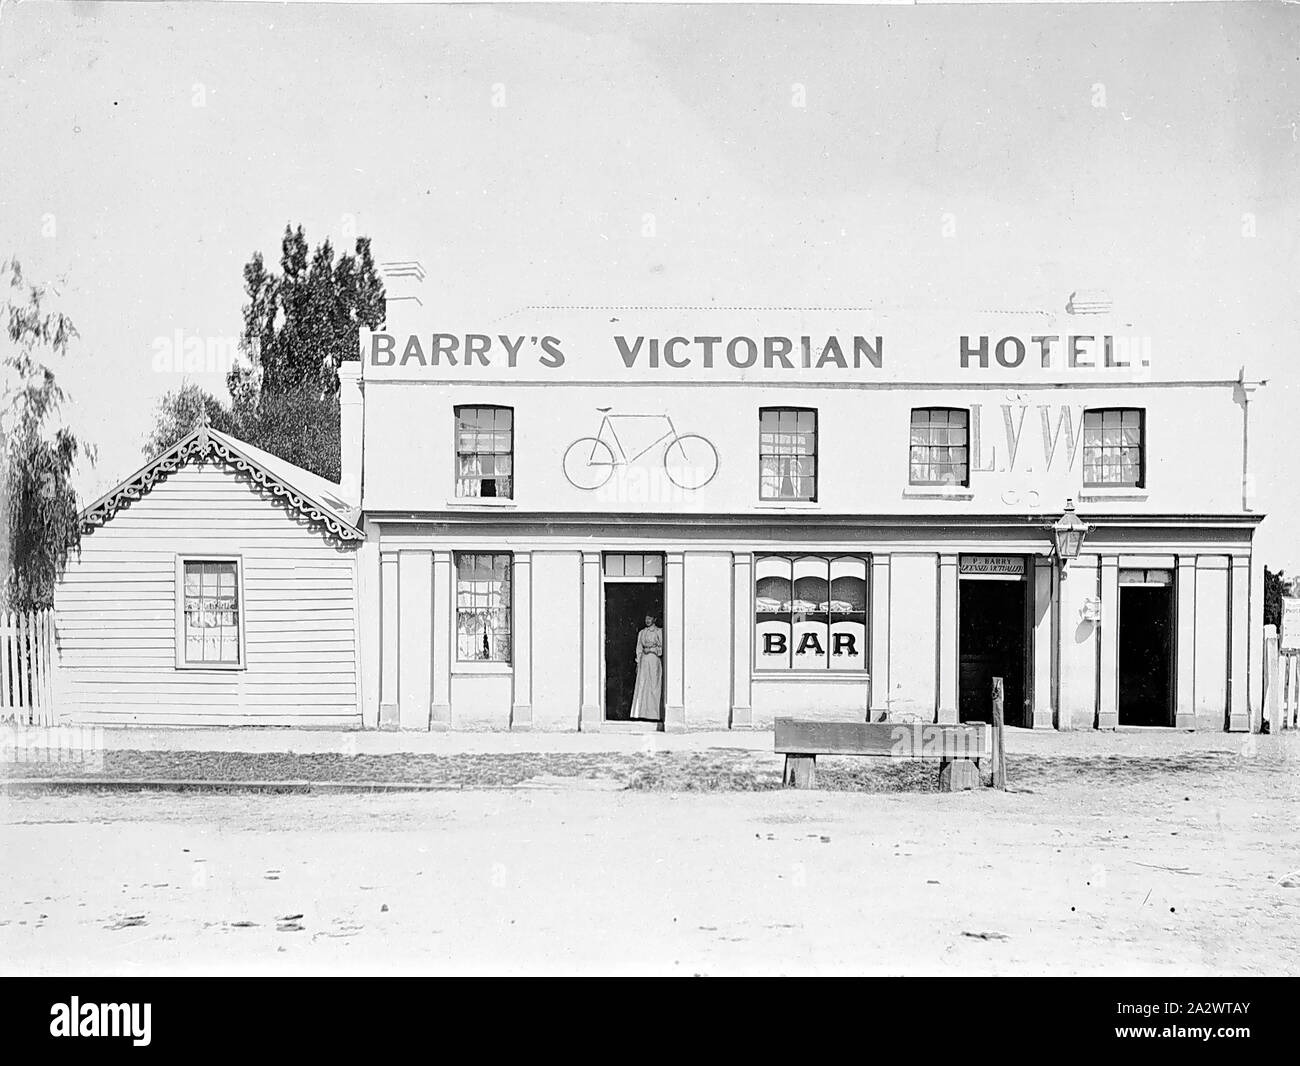 Negative - Gisborne, Victoria, 1899, Barry's Victorian Hotel. A woman stands in the doorway and there is a bicycle drawn on the wall of the hotel and the letters 'LVW Stock Photo